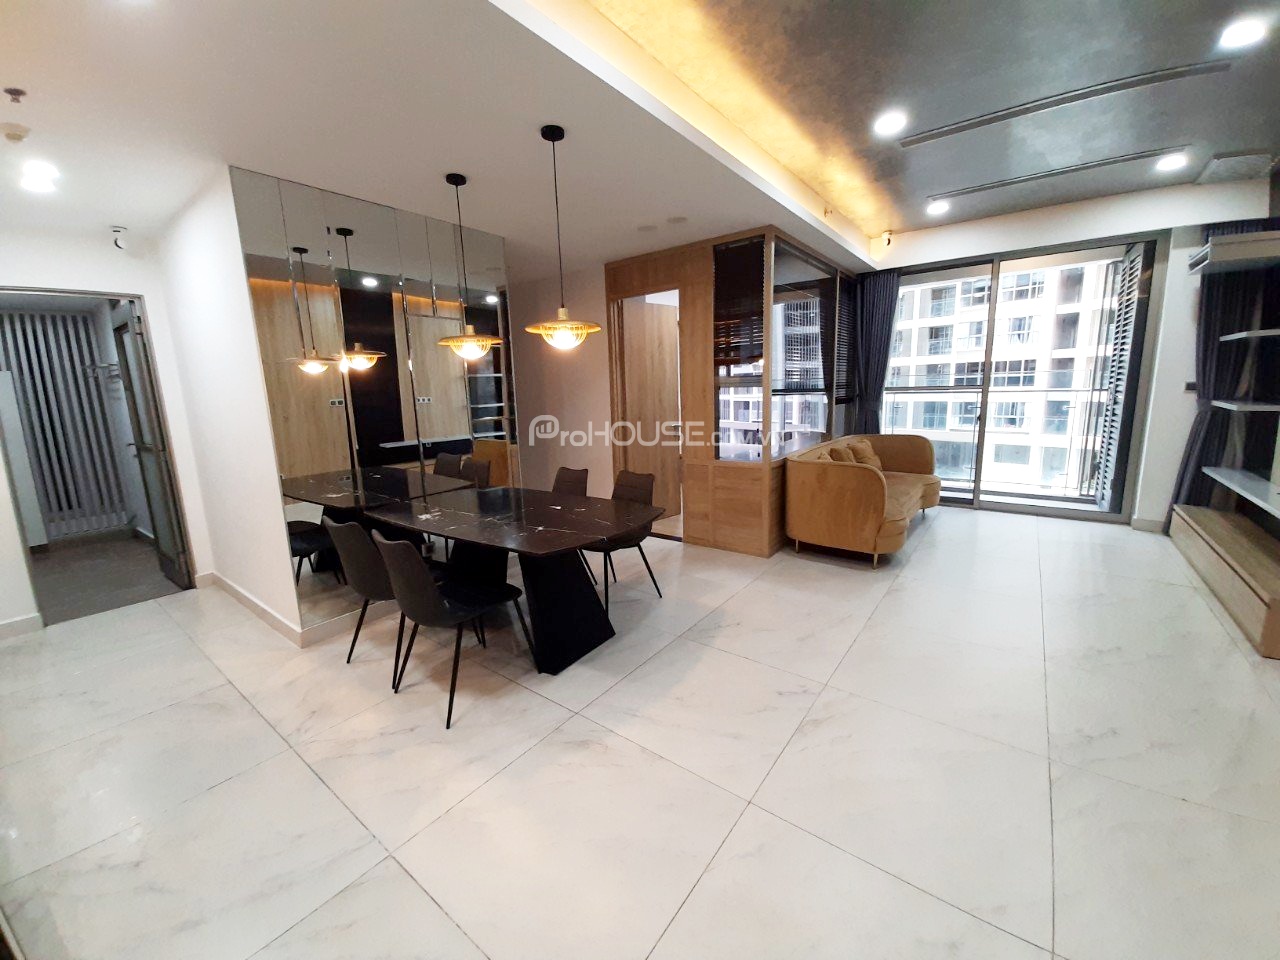 Modern 2-bedroom apartment for sale in Midtown Phu My Hung with full furniture